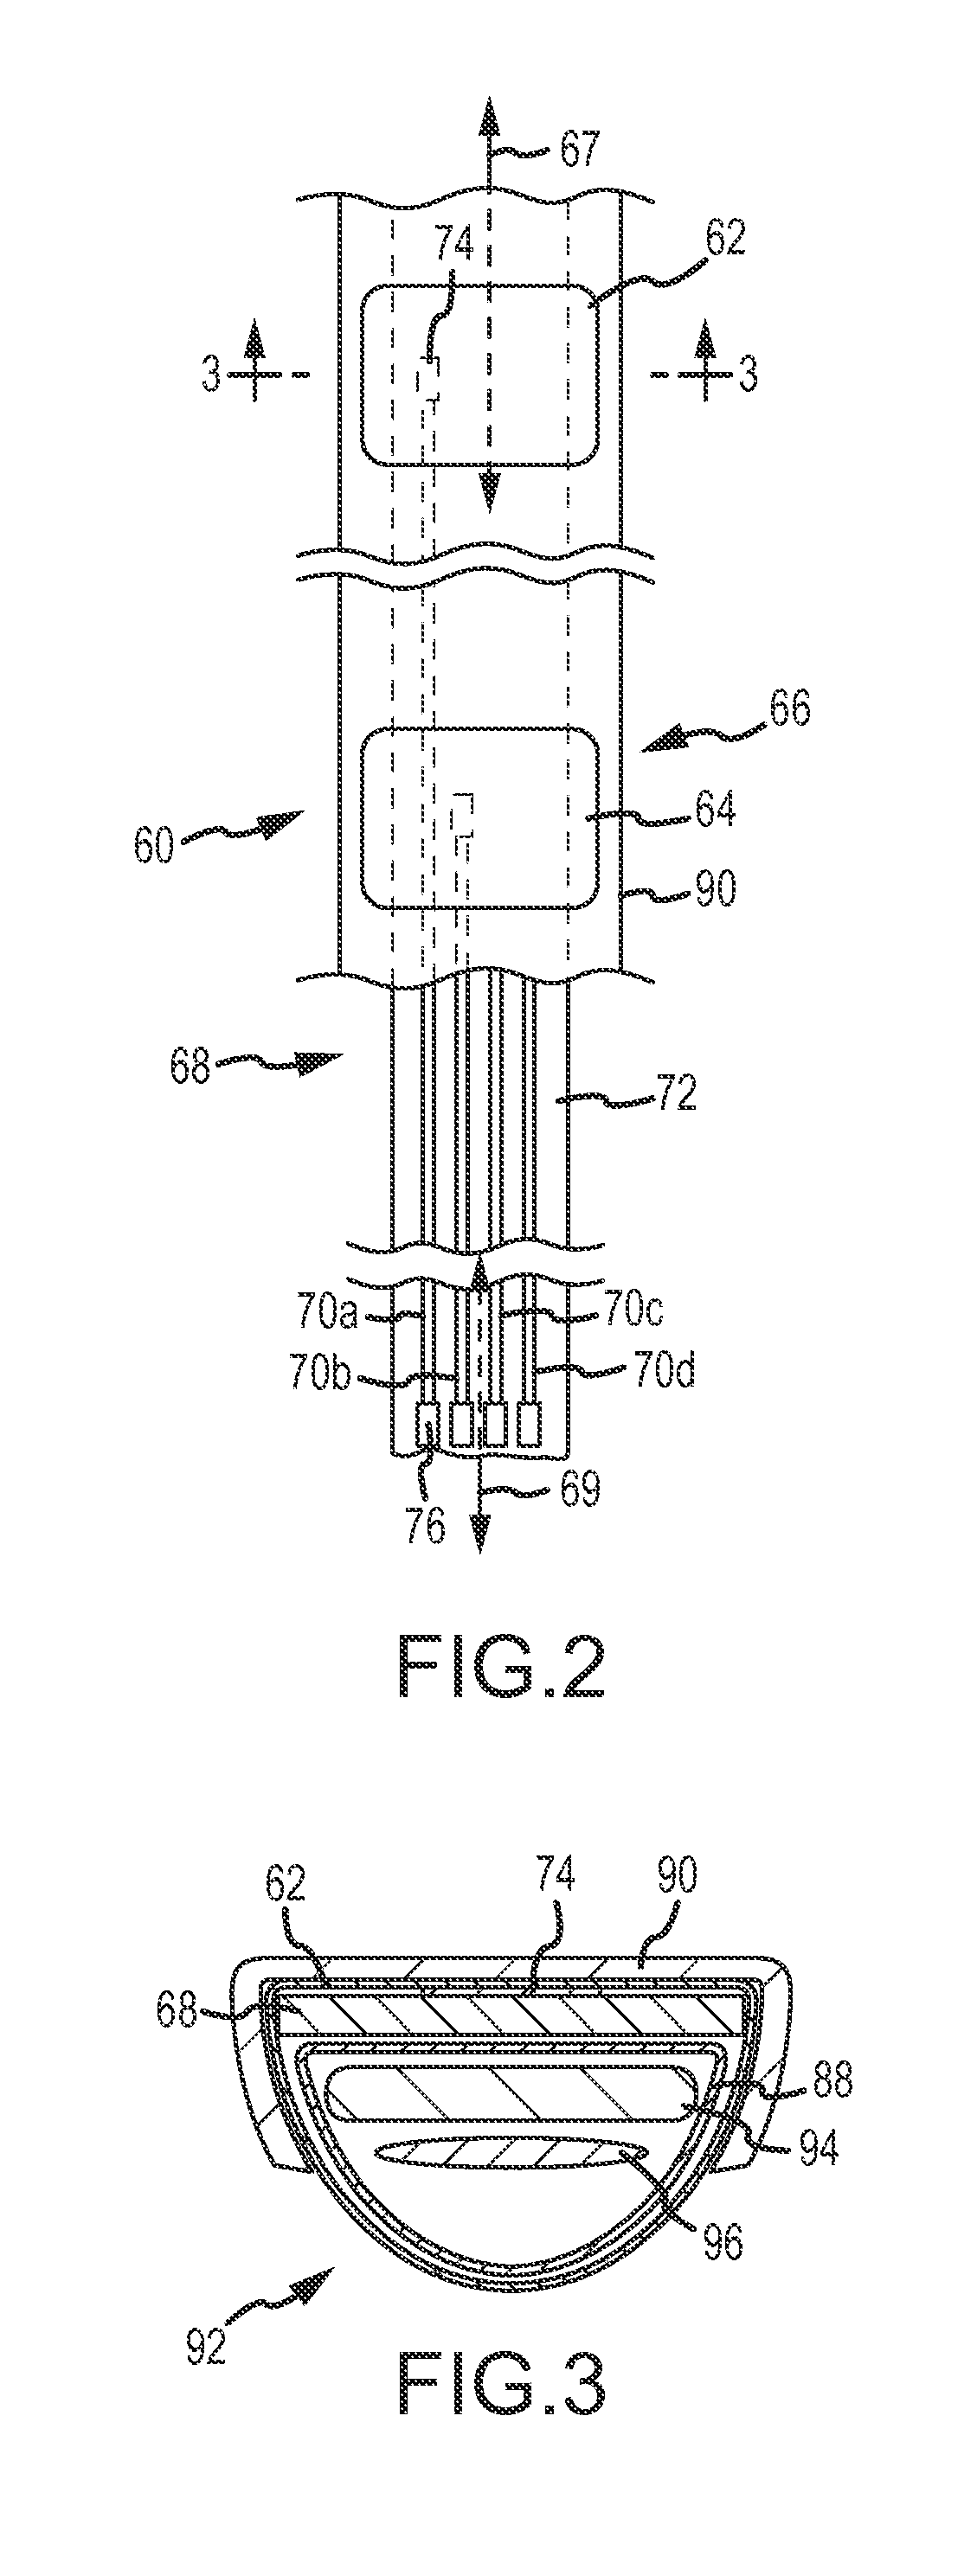 Catheter electrode assemblies and methods of construction therefor